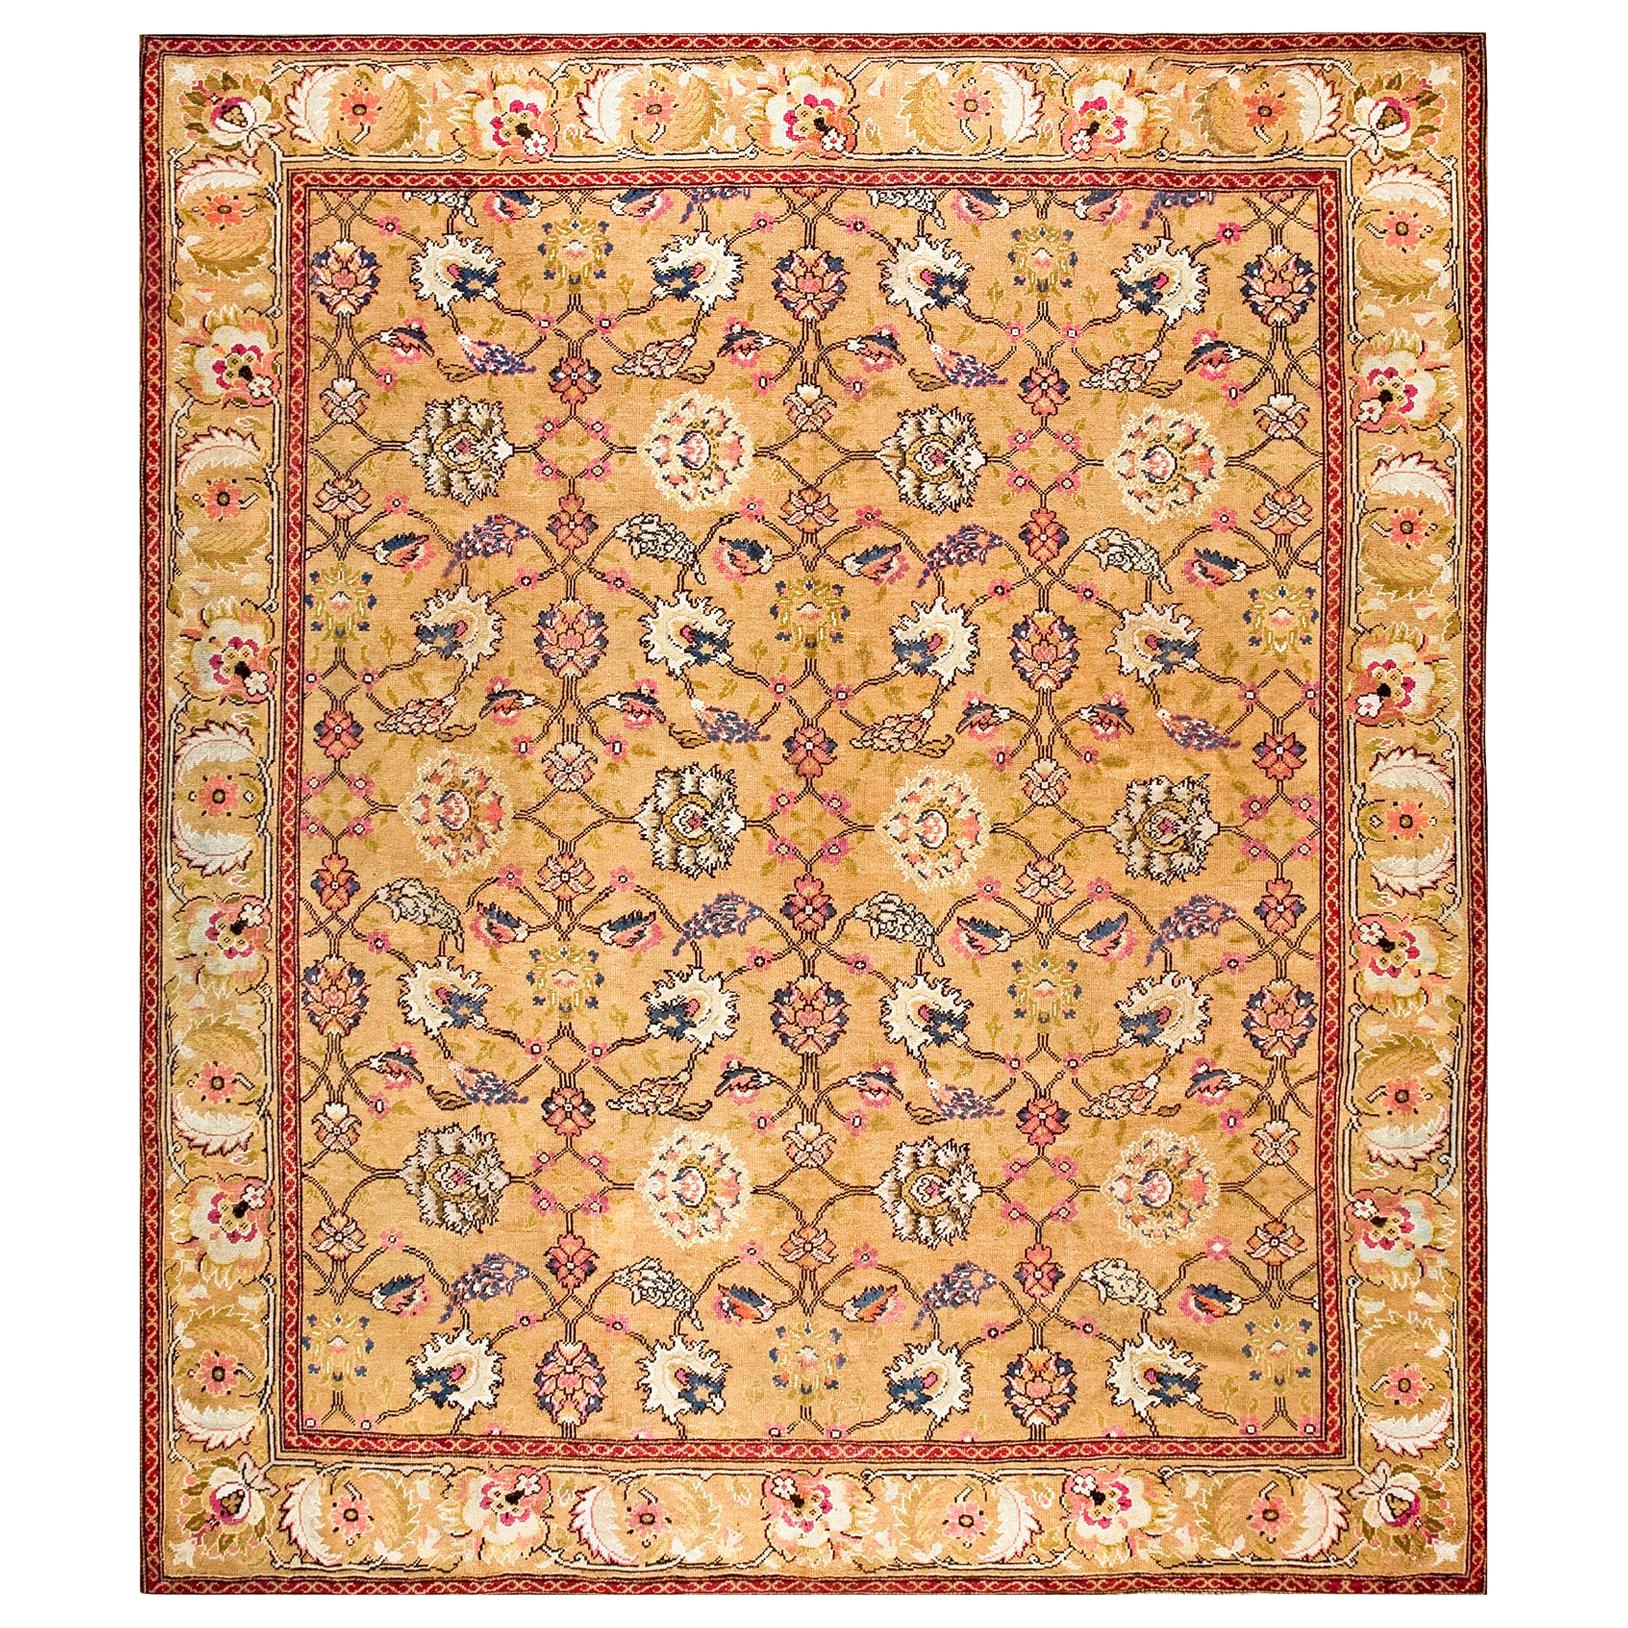 Mid-18th Century English Axminster Carpet ( 12' x 14' - 366 x 427 ) For Sale